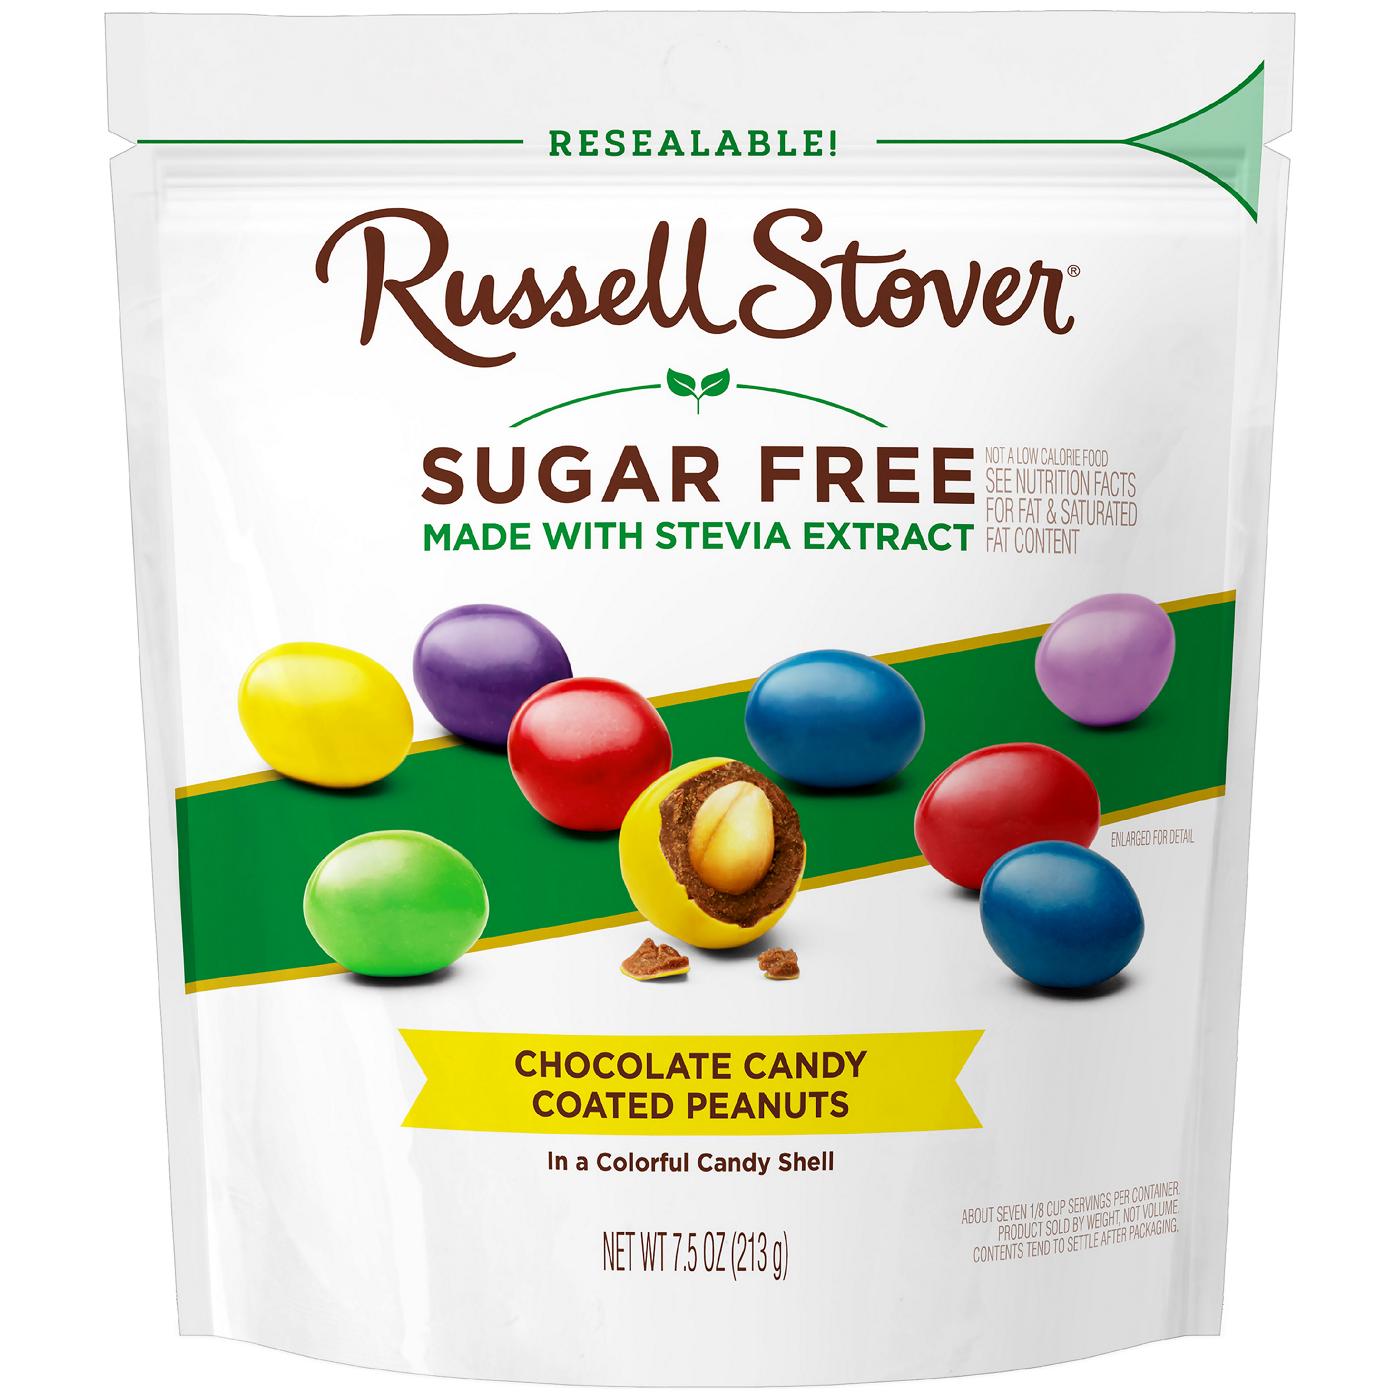 Russell Stover Sugar Free Candy Coated Chocolate Peanuts; image 1 of 6